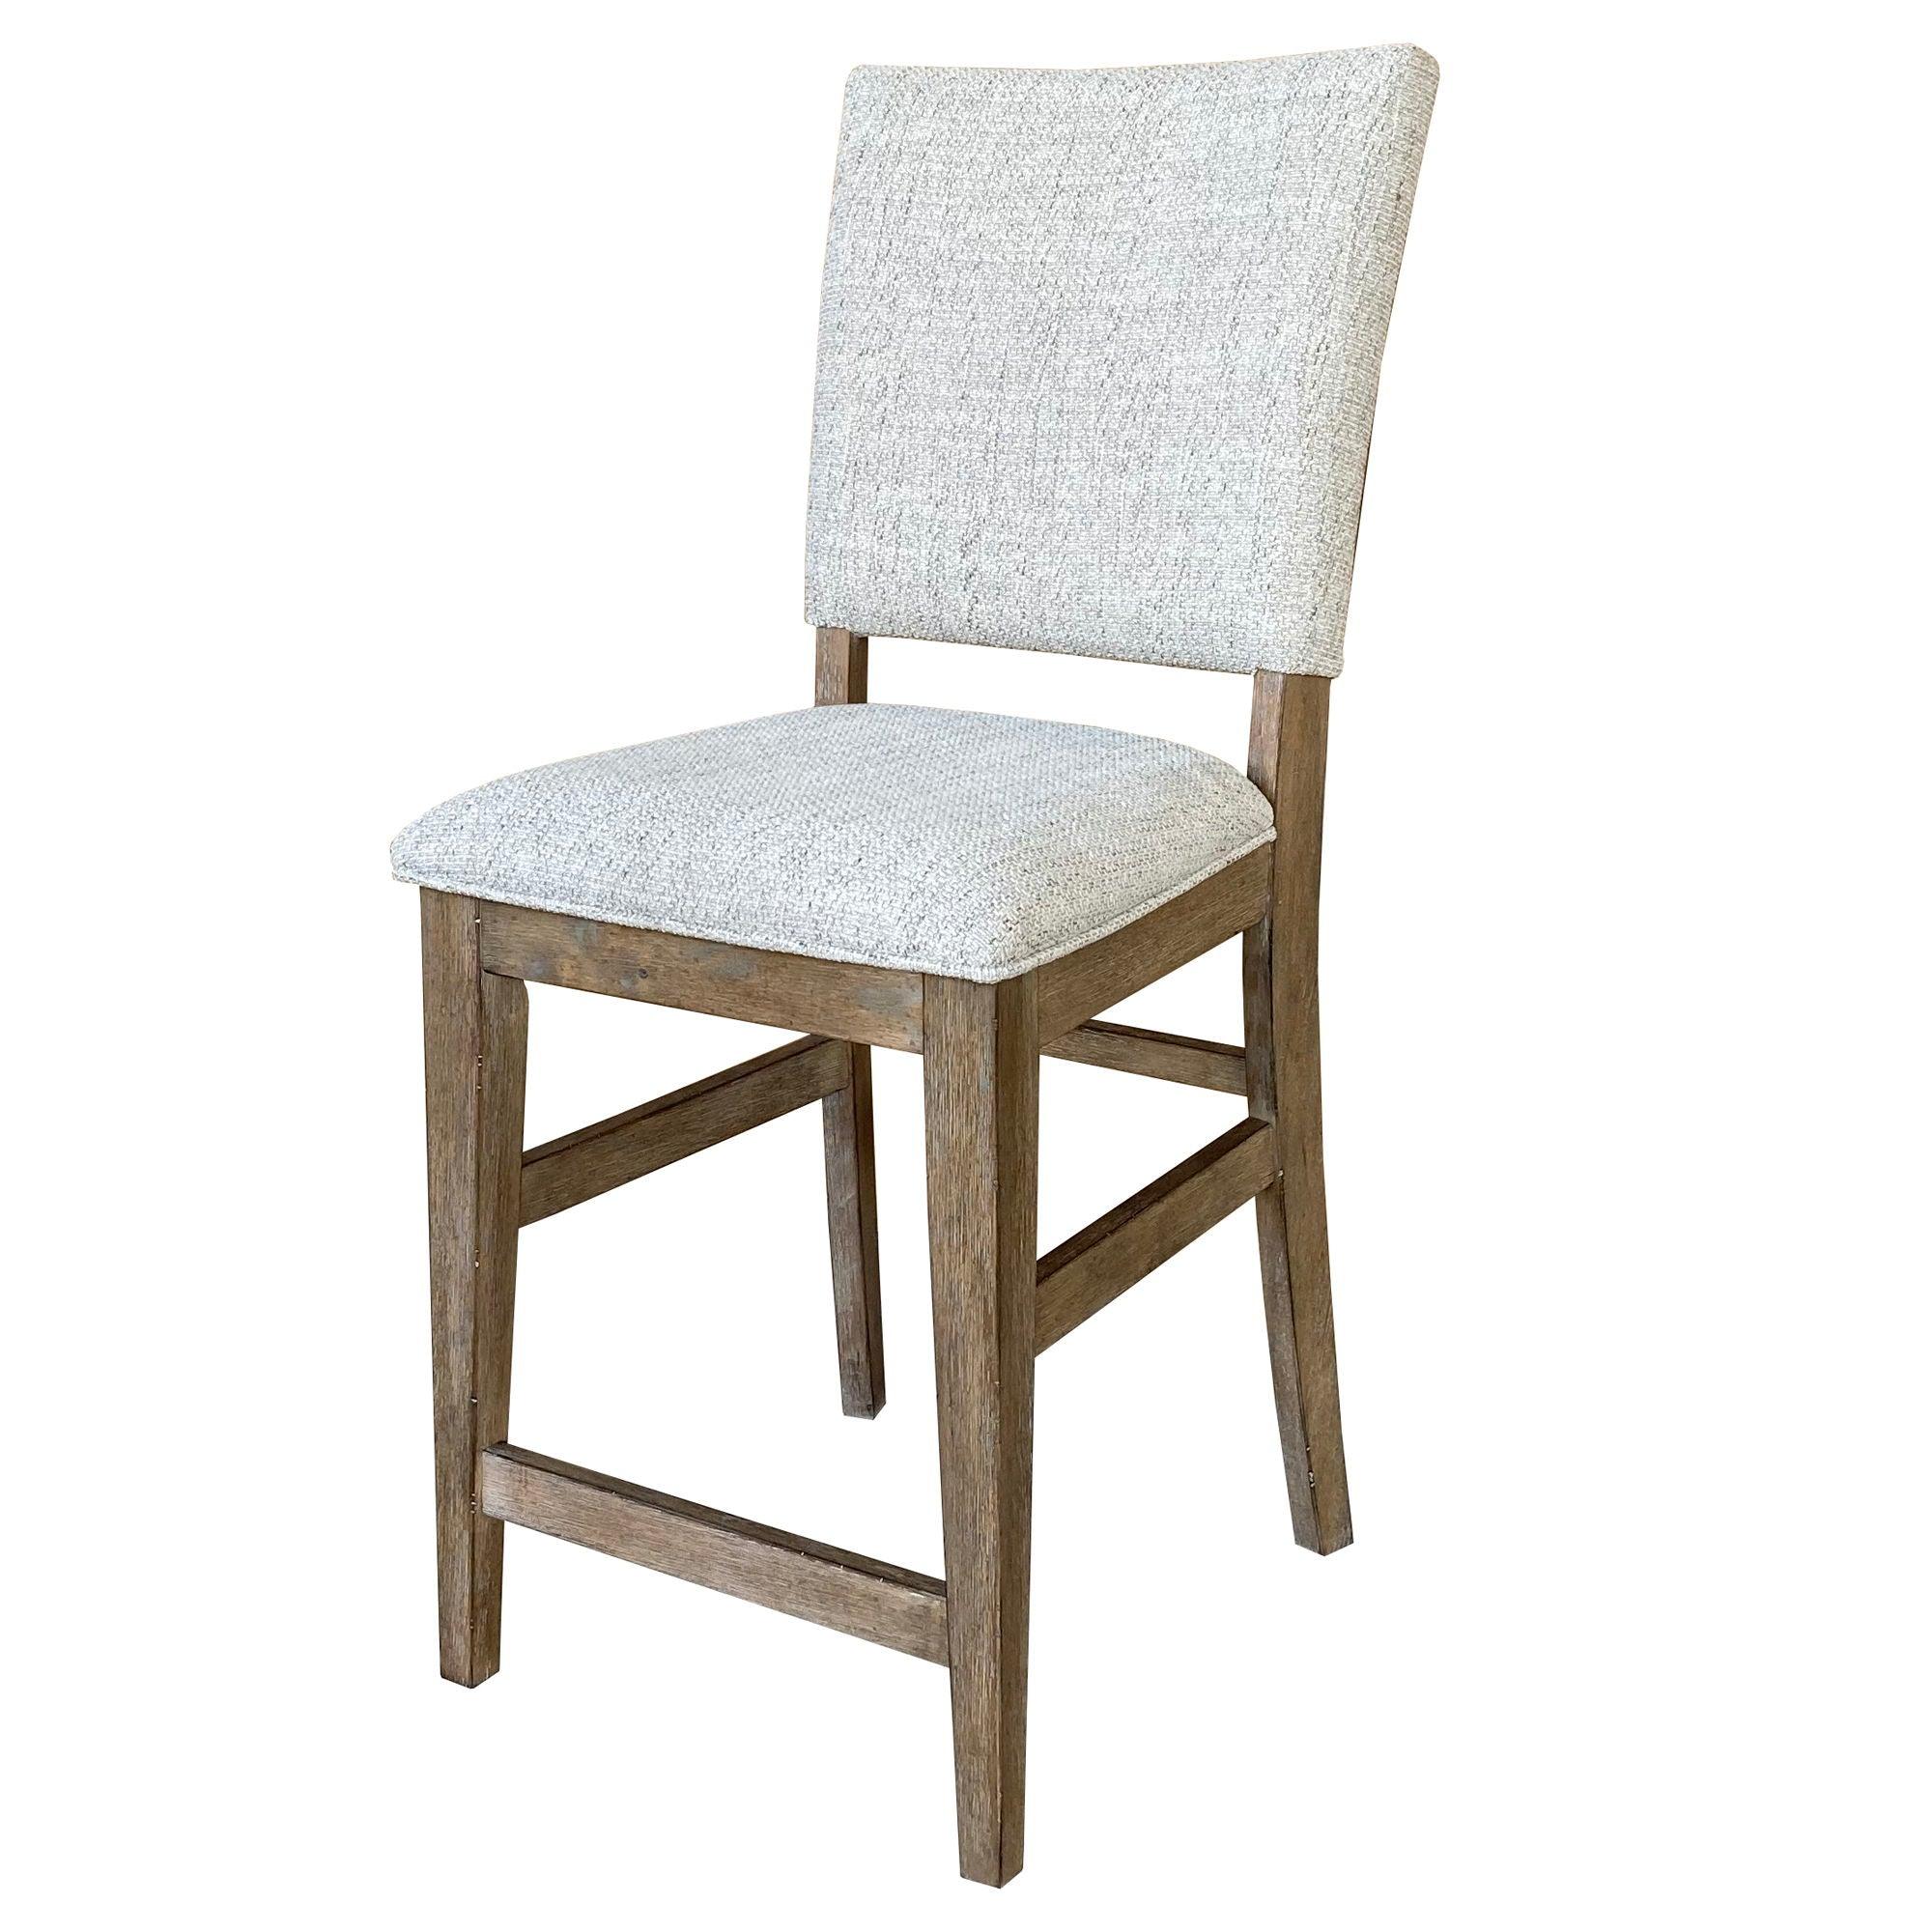 Parker House - Sundance Dining - Counter Chair Upholstered (Set of 2) - Sandstone - 5th Avenue Furniture